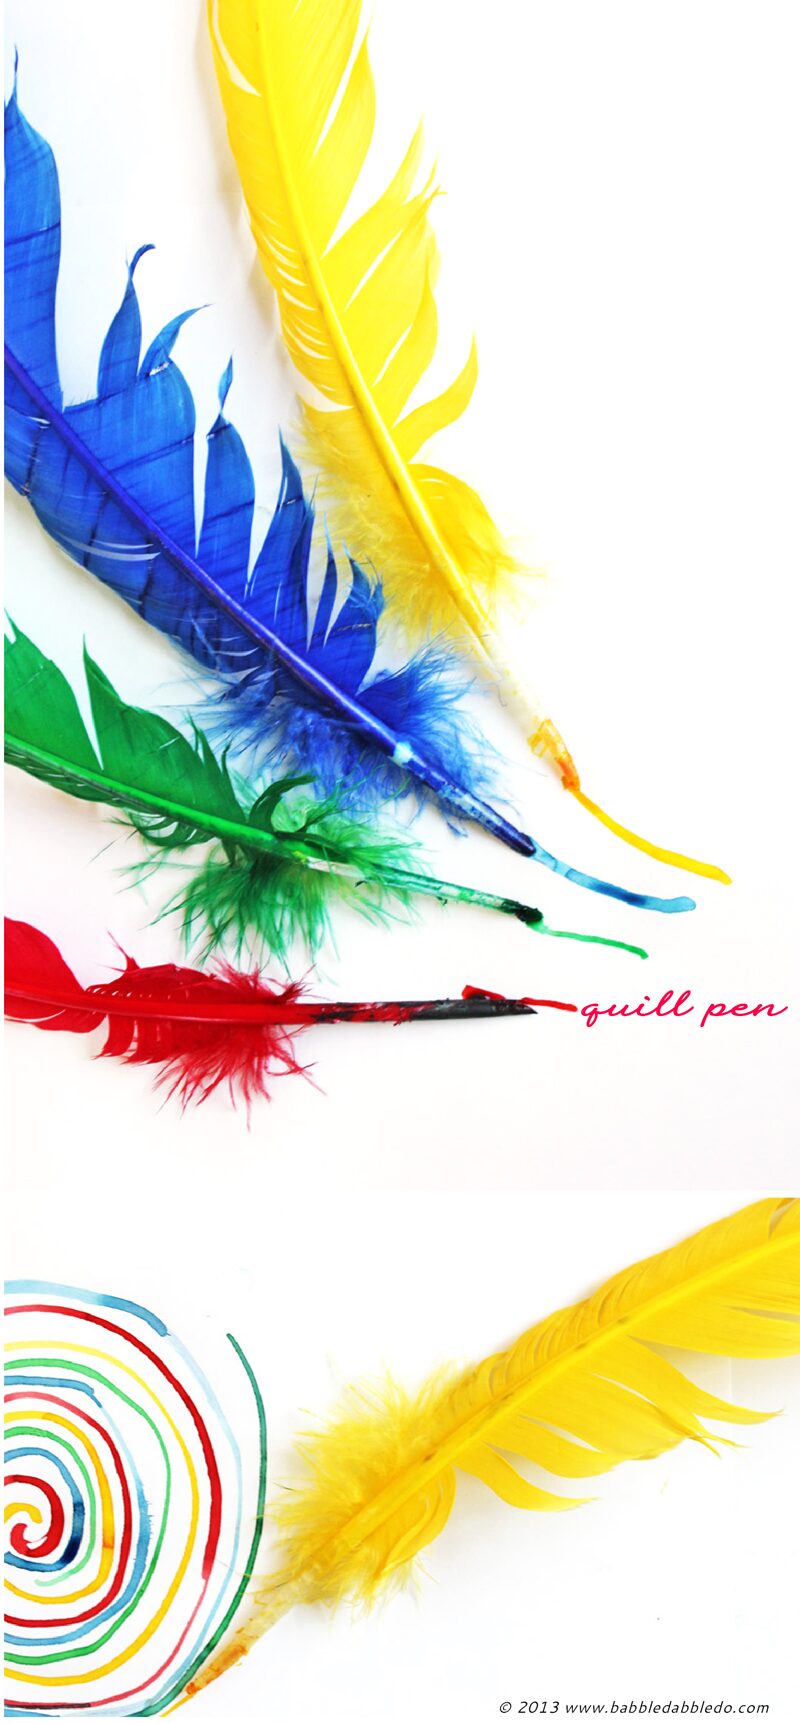 How To Make A Quill Pen